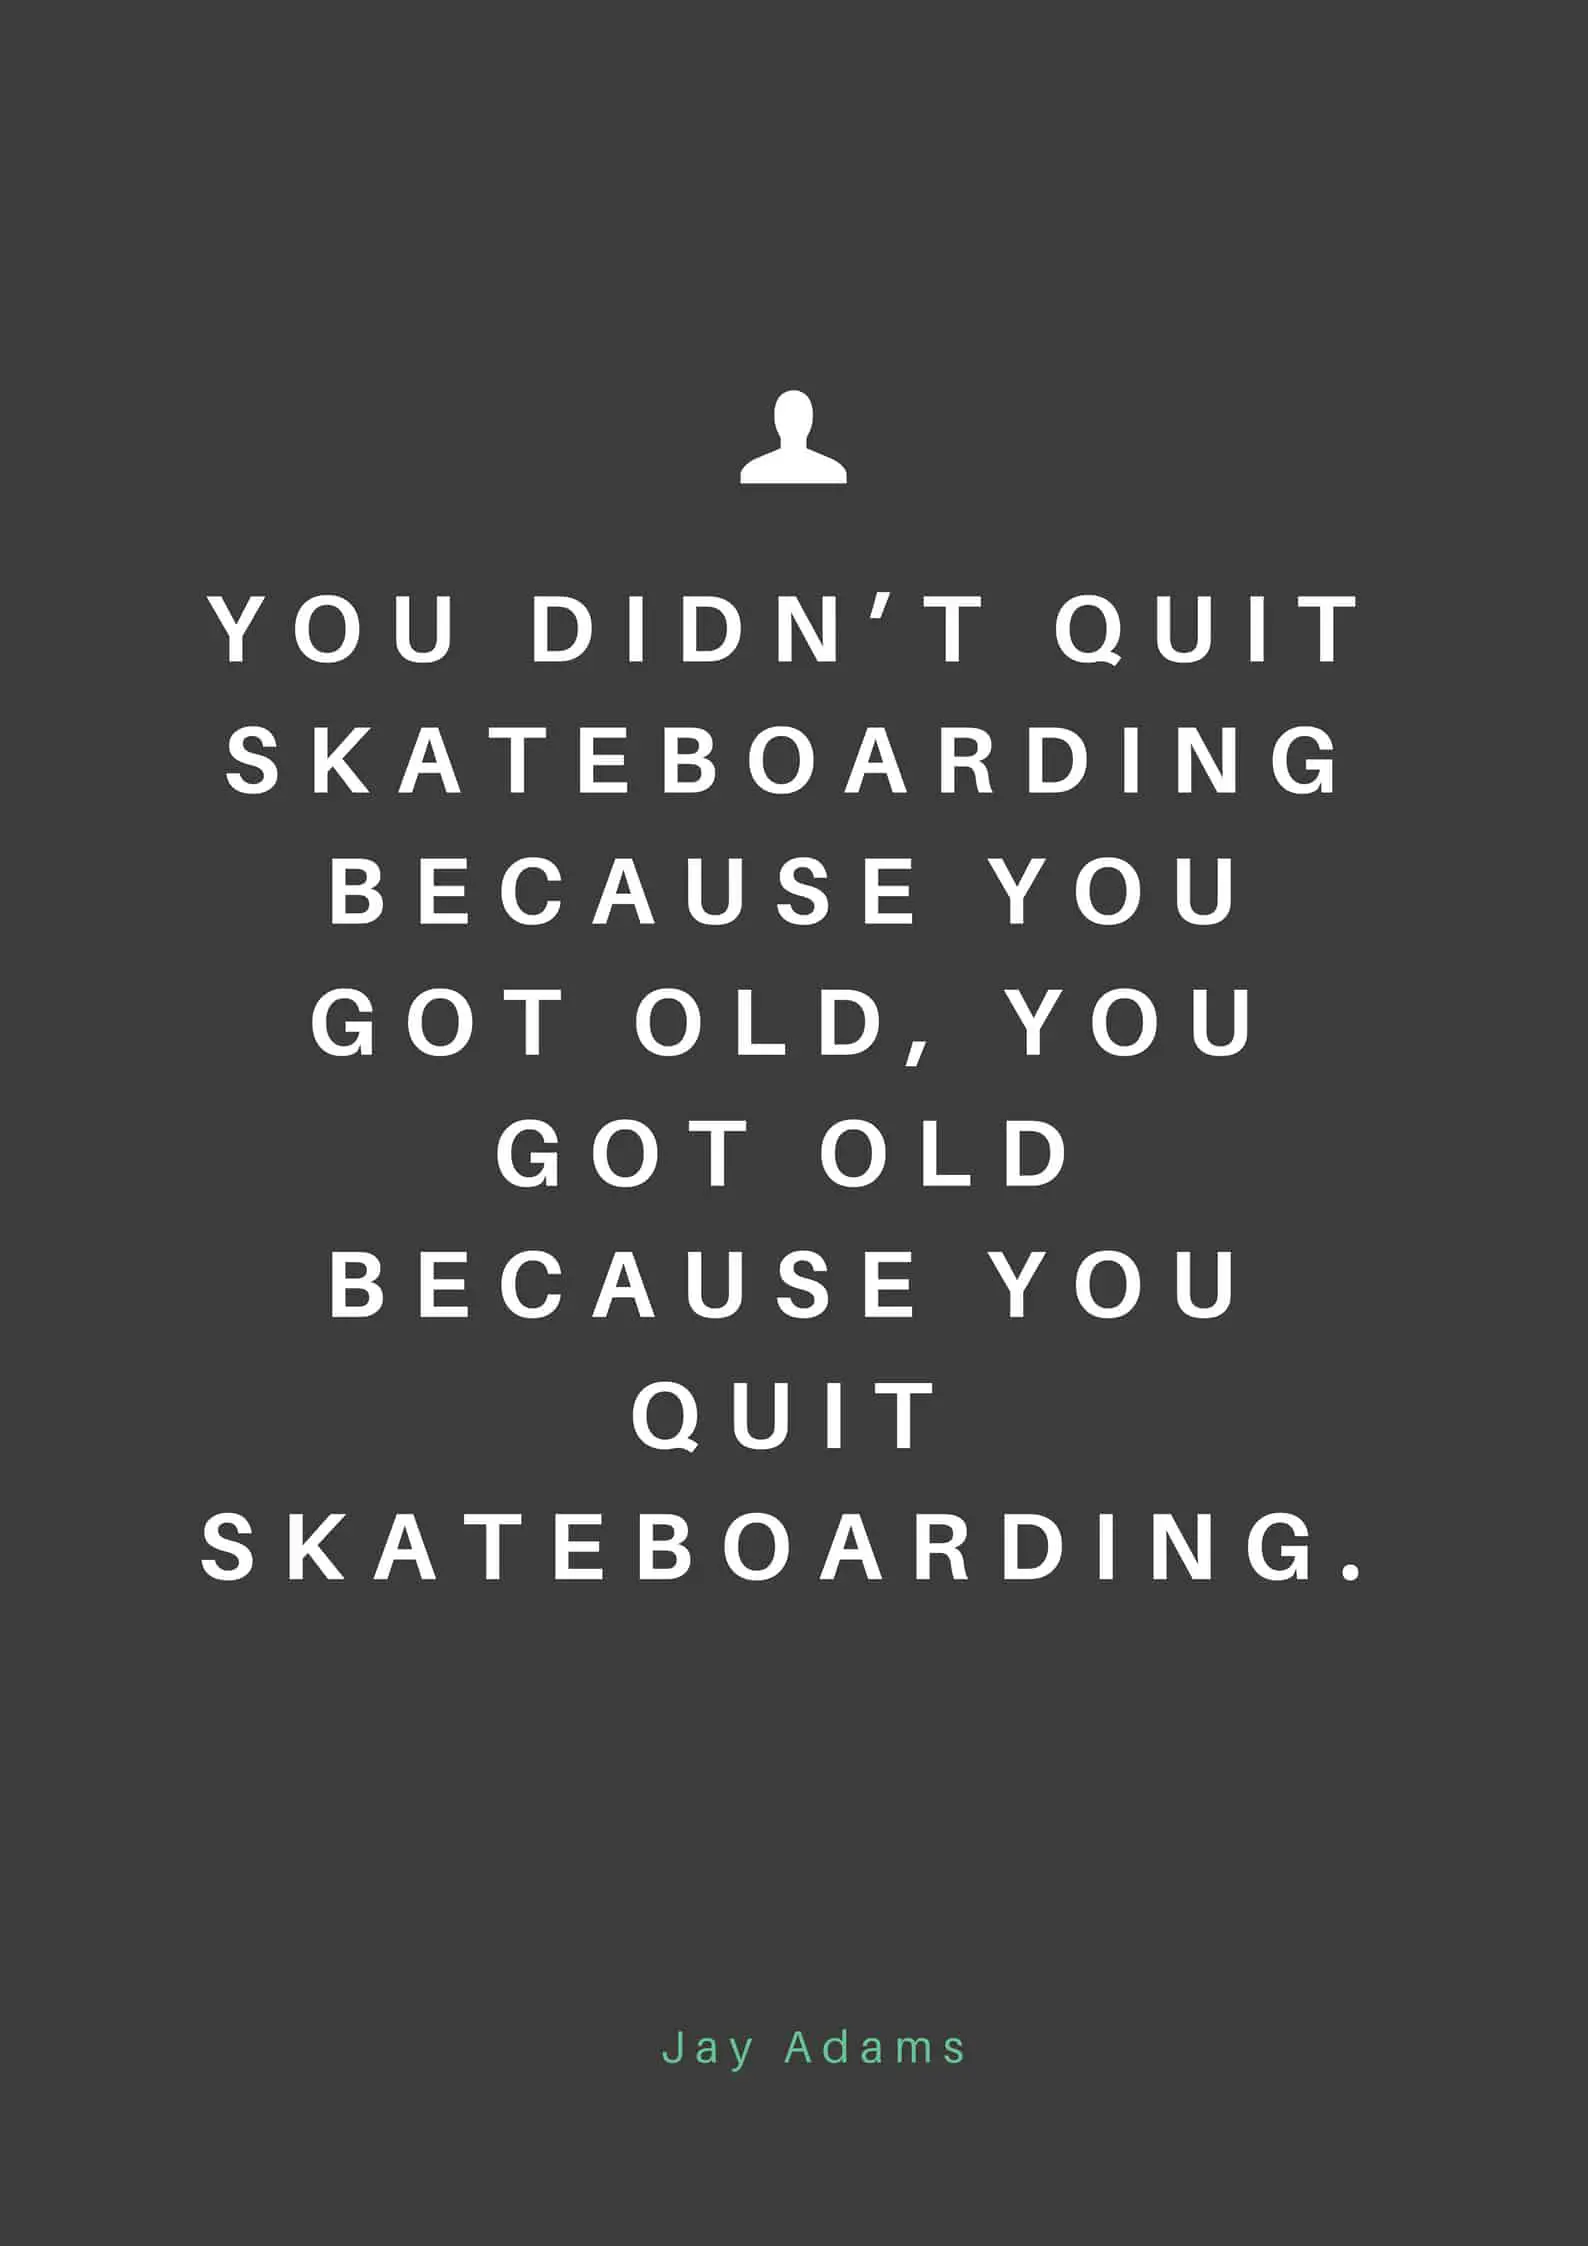 You didn’t quit skateboarding because you got old, you got old because you quit skateboarding.